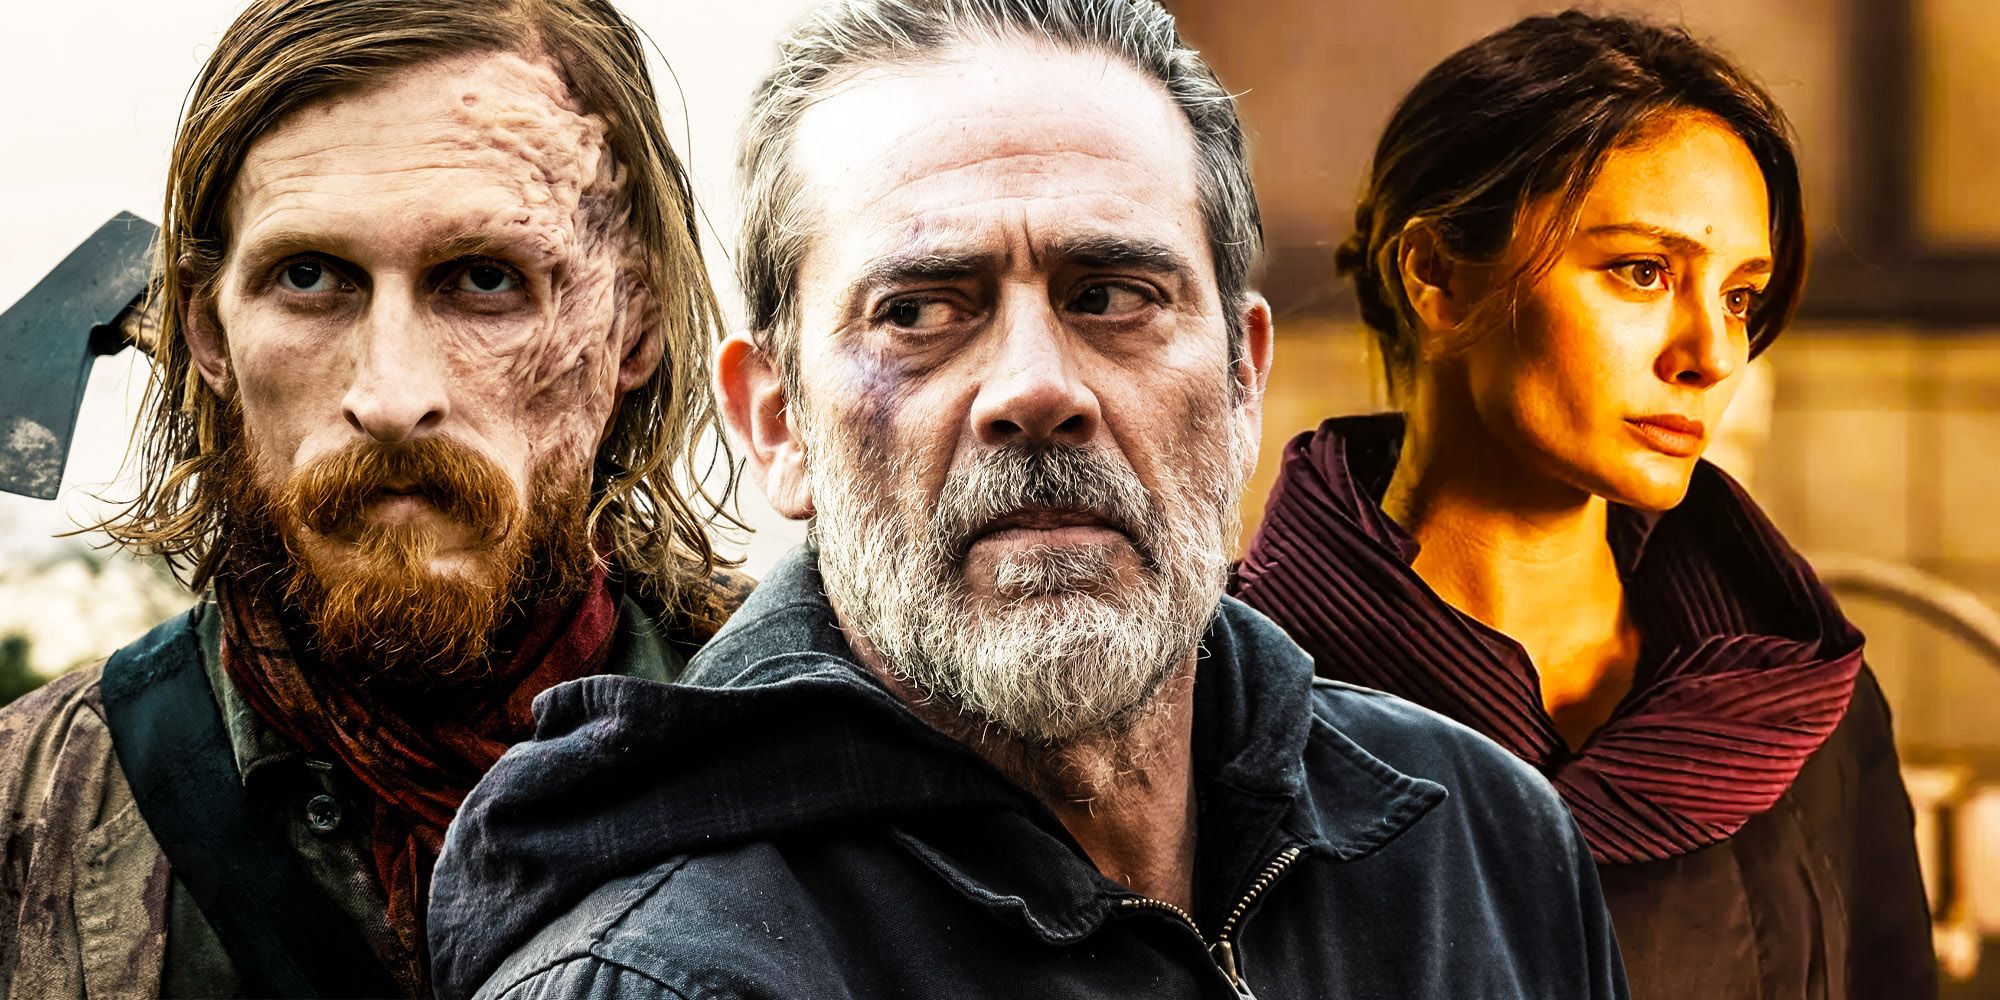 Fear The Walking Dead’s Time Skip Finally Makes 1 Negan Story Possible